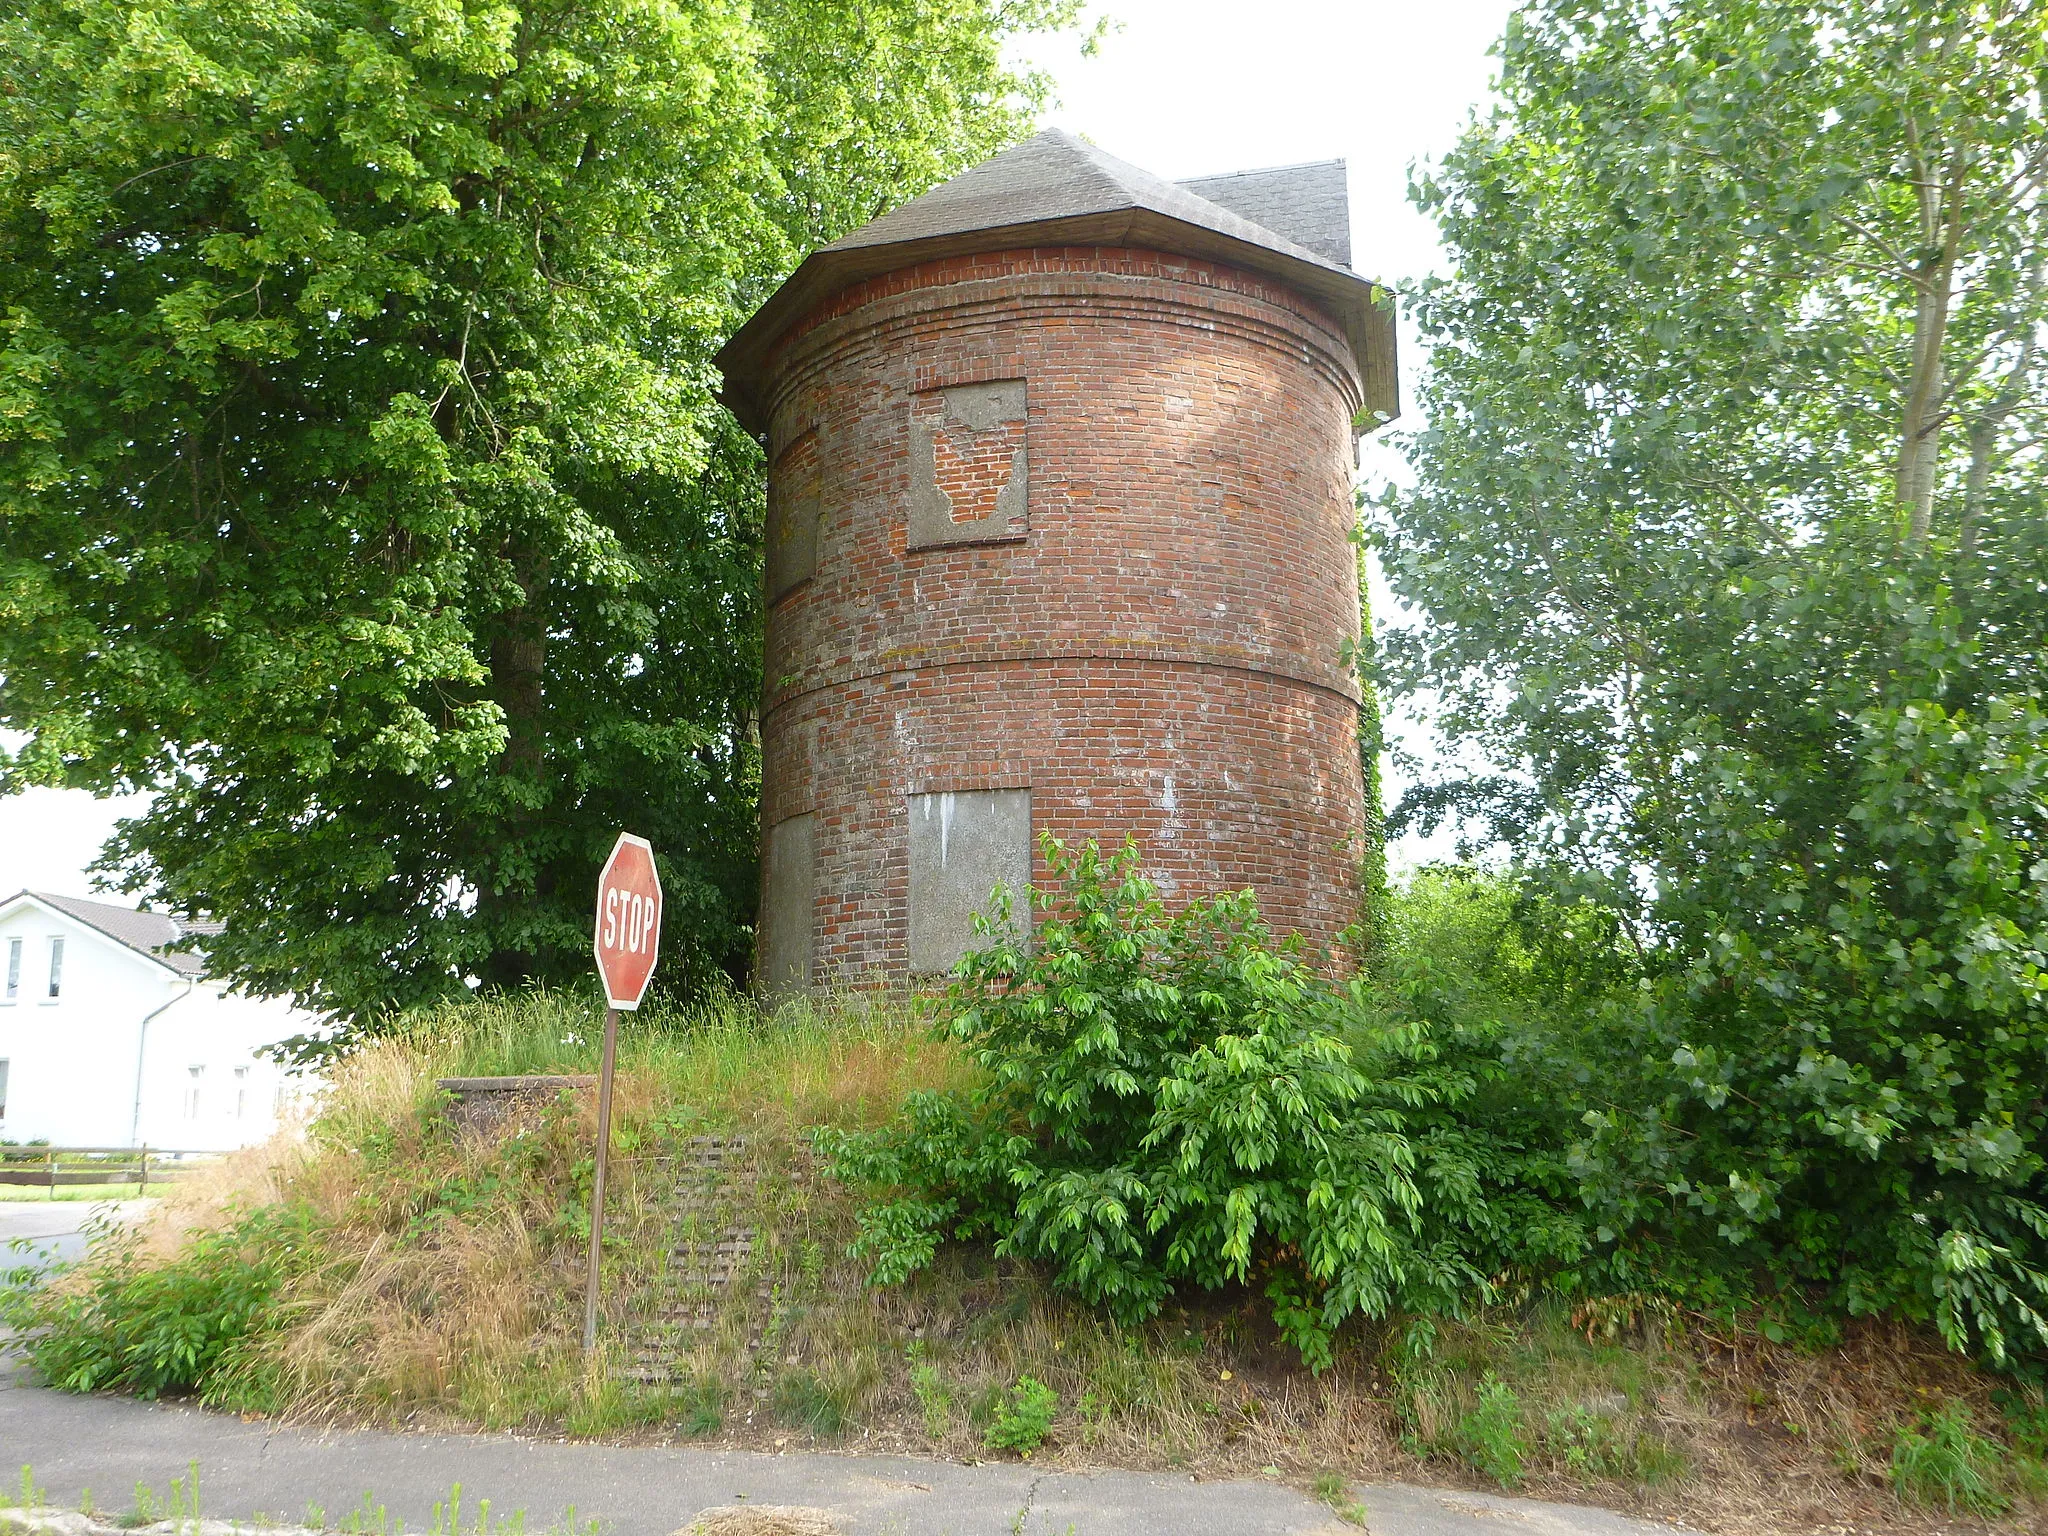 Photo showing: The water tower in Groß Vollstedt